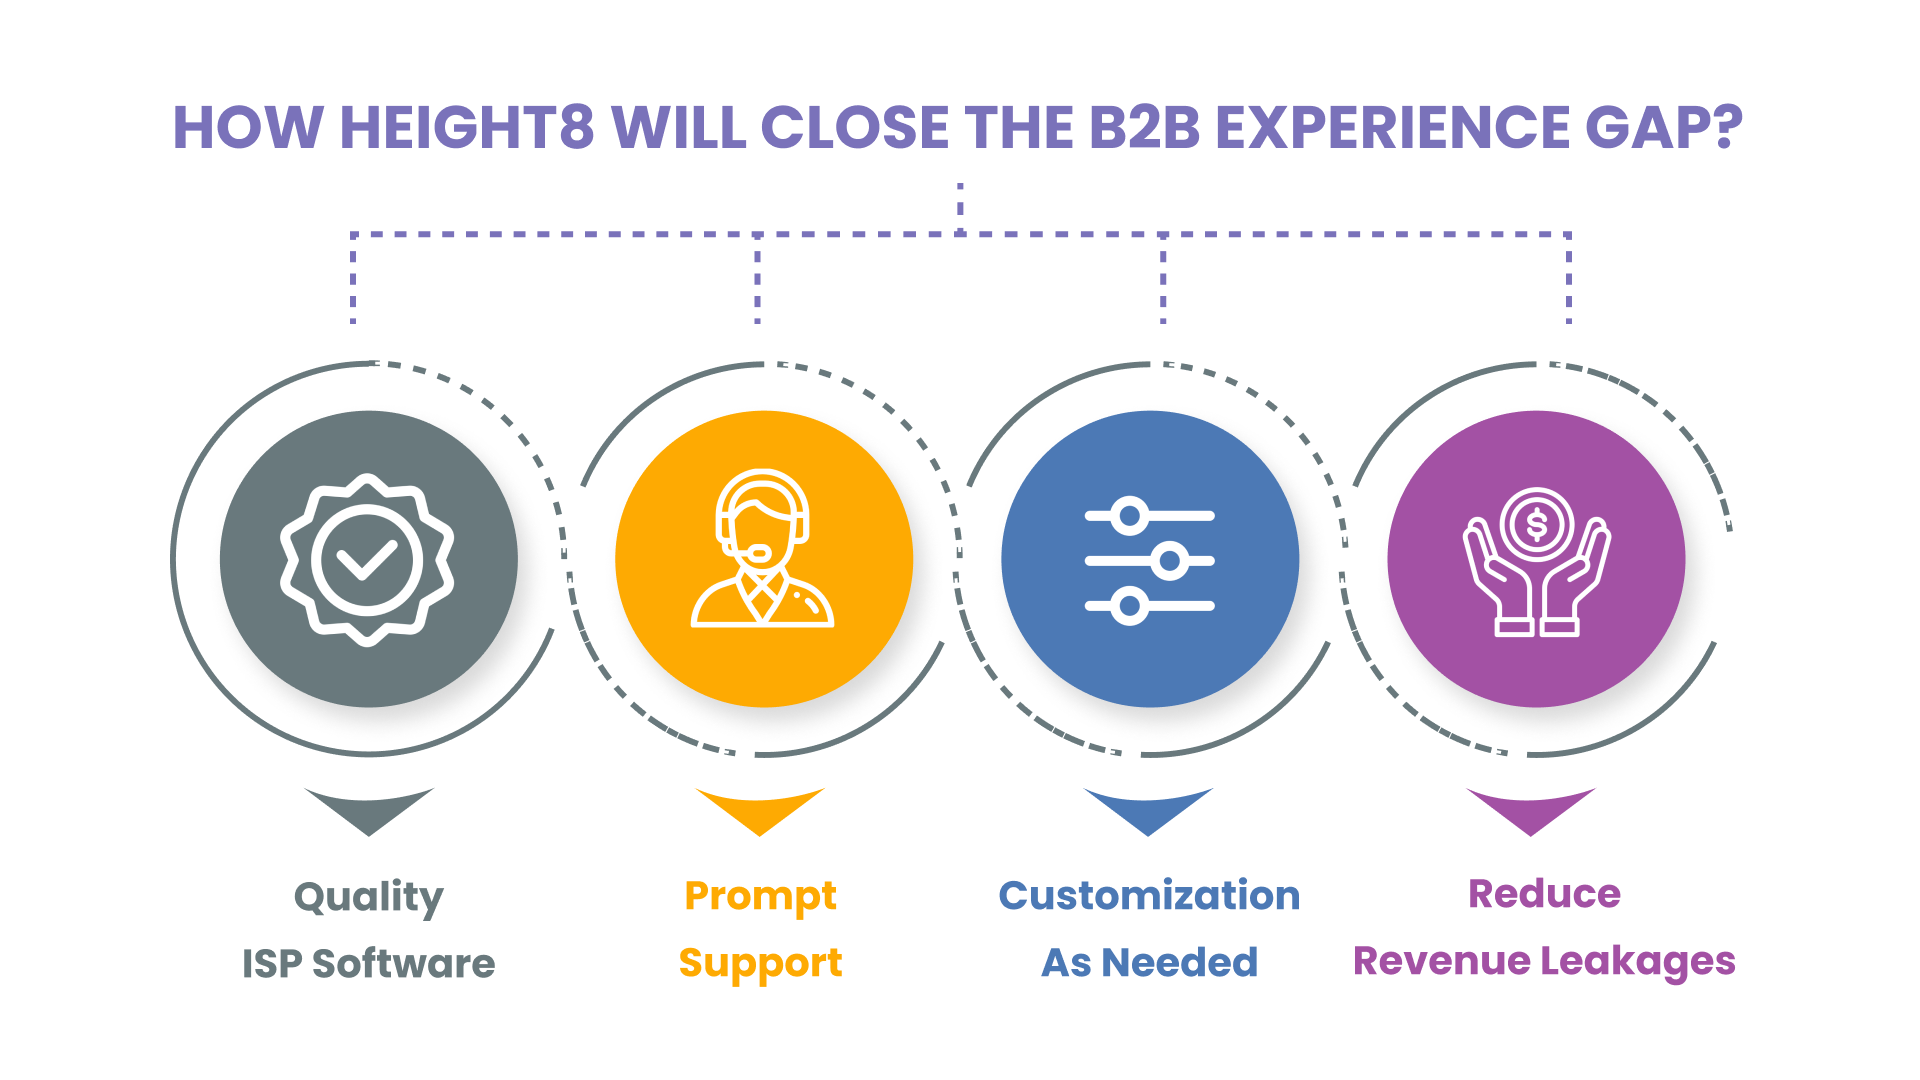 How height8 will close the B2B experience gap